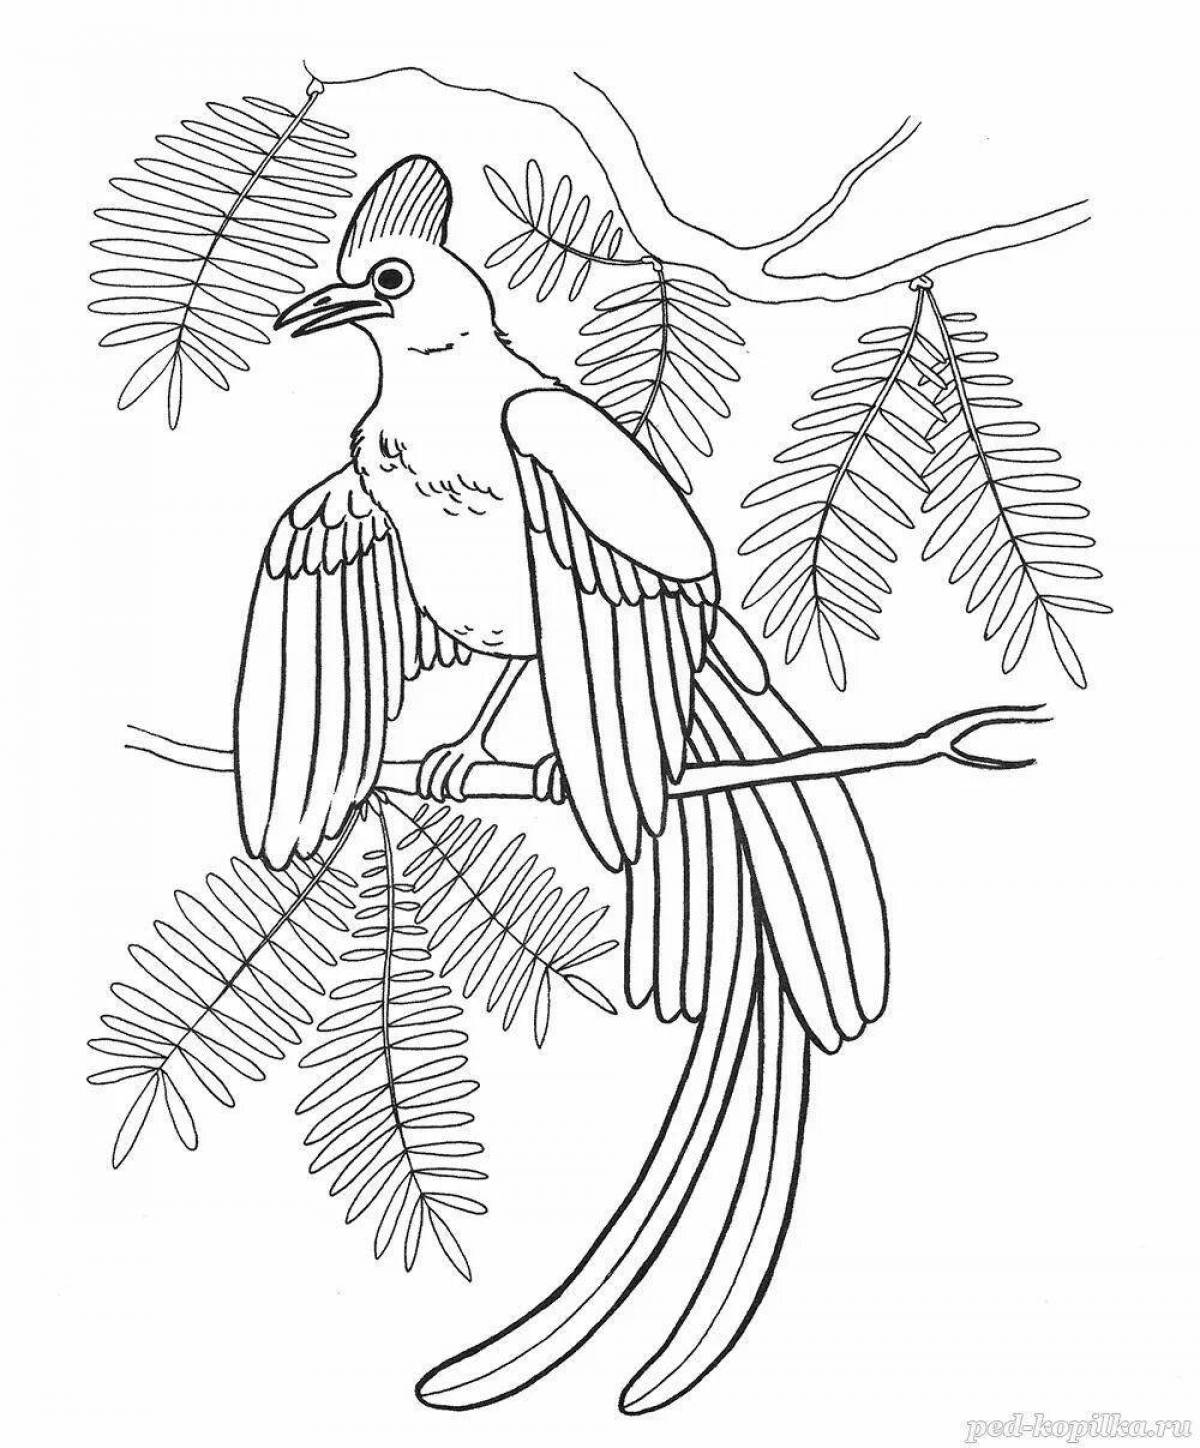 Delightful bird of paradise coloring pages